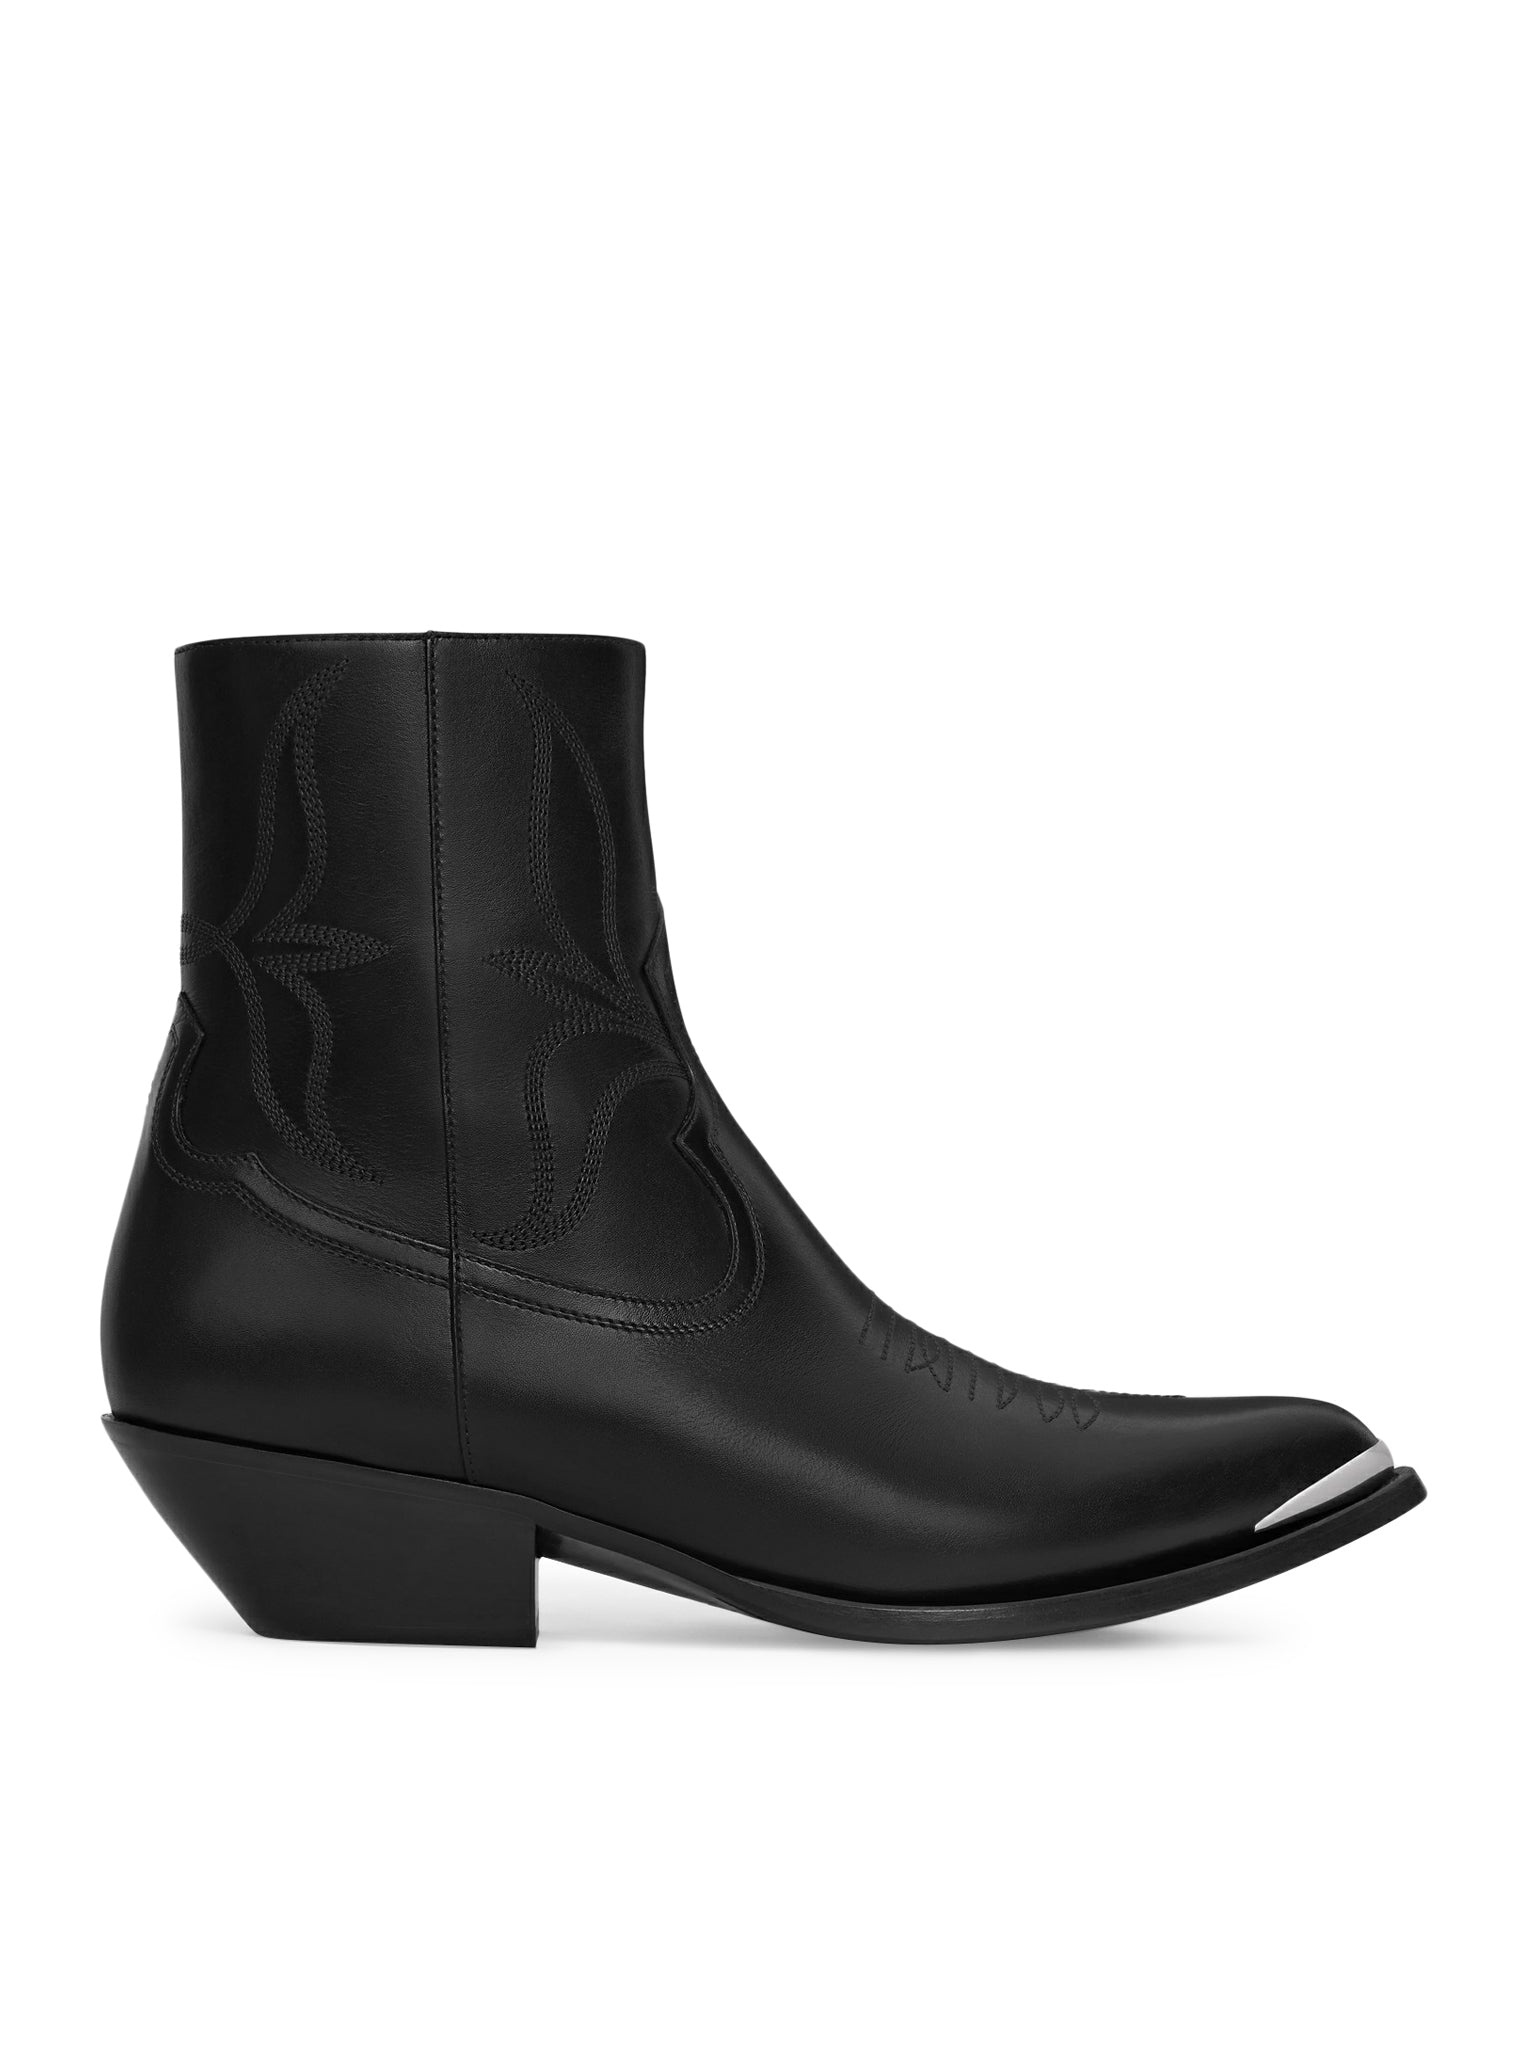 CELINE LEON BOOT WITH ZIP AND METAL TOE IN POLISHED CALFSKIN - 1